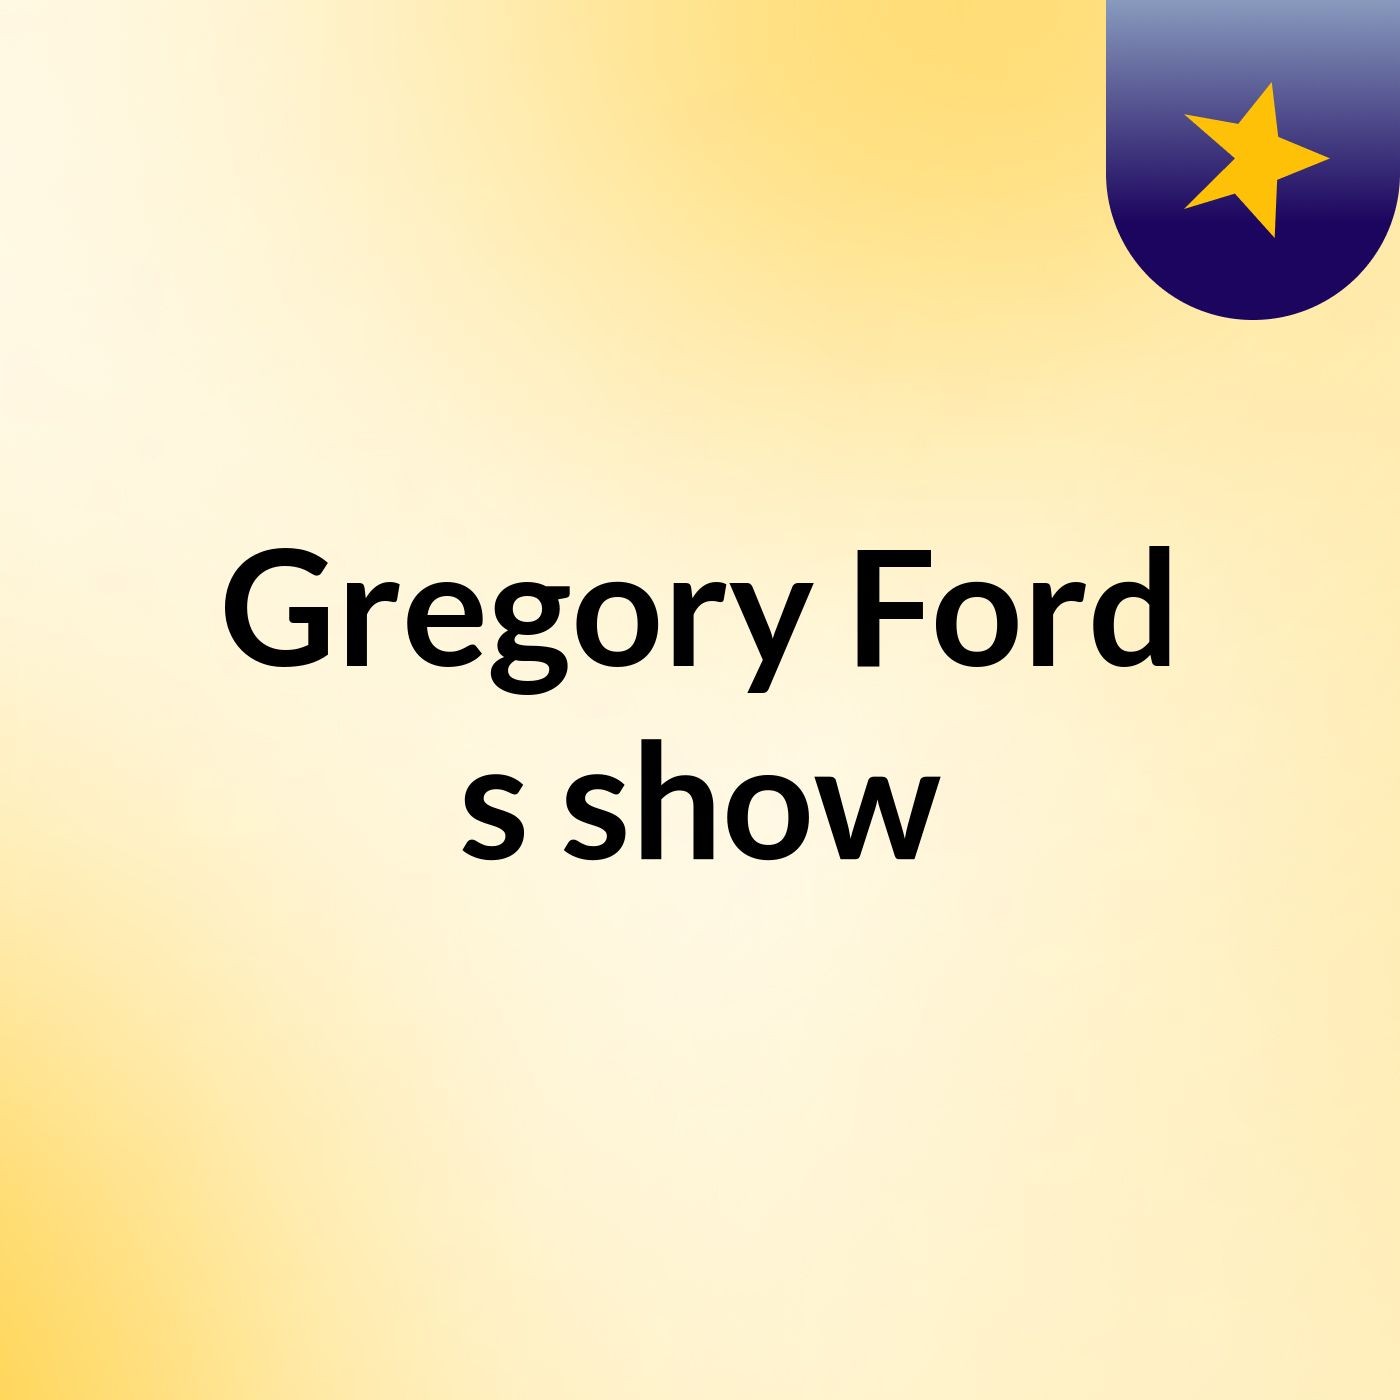 Episode 8 - Gregory Ford's show